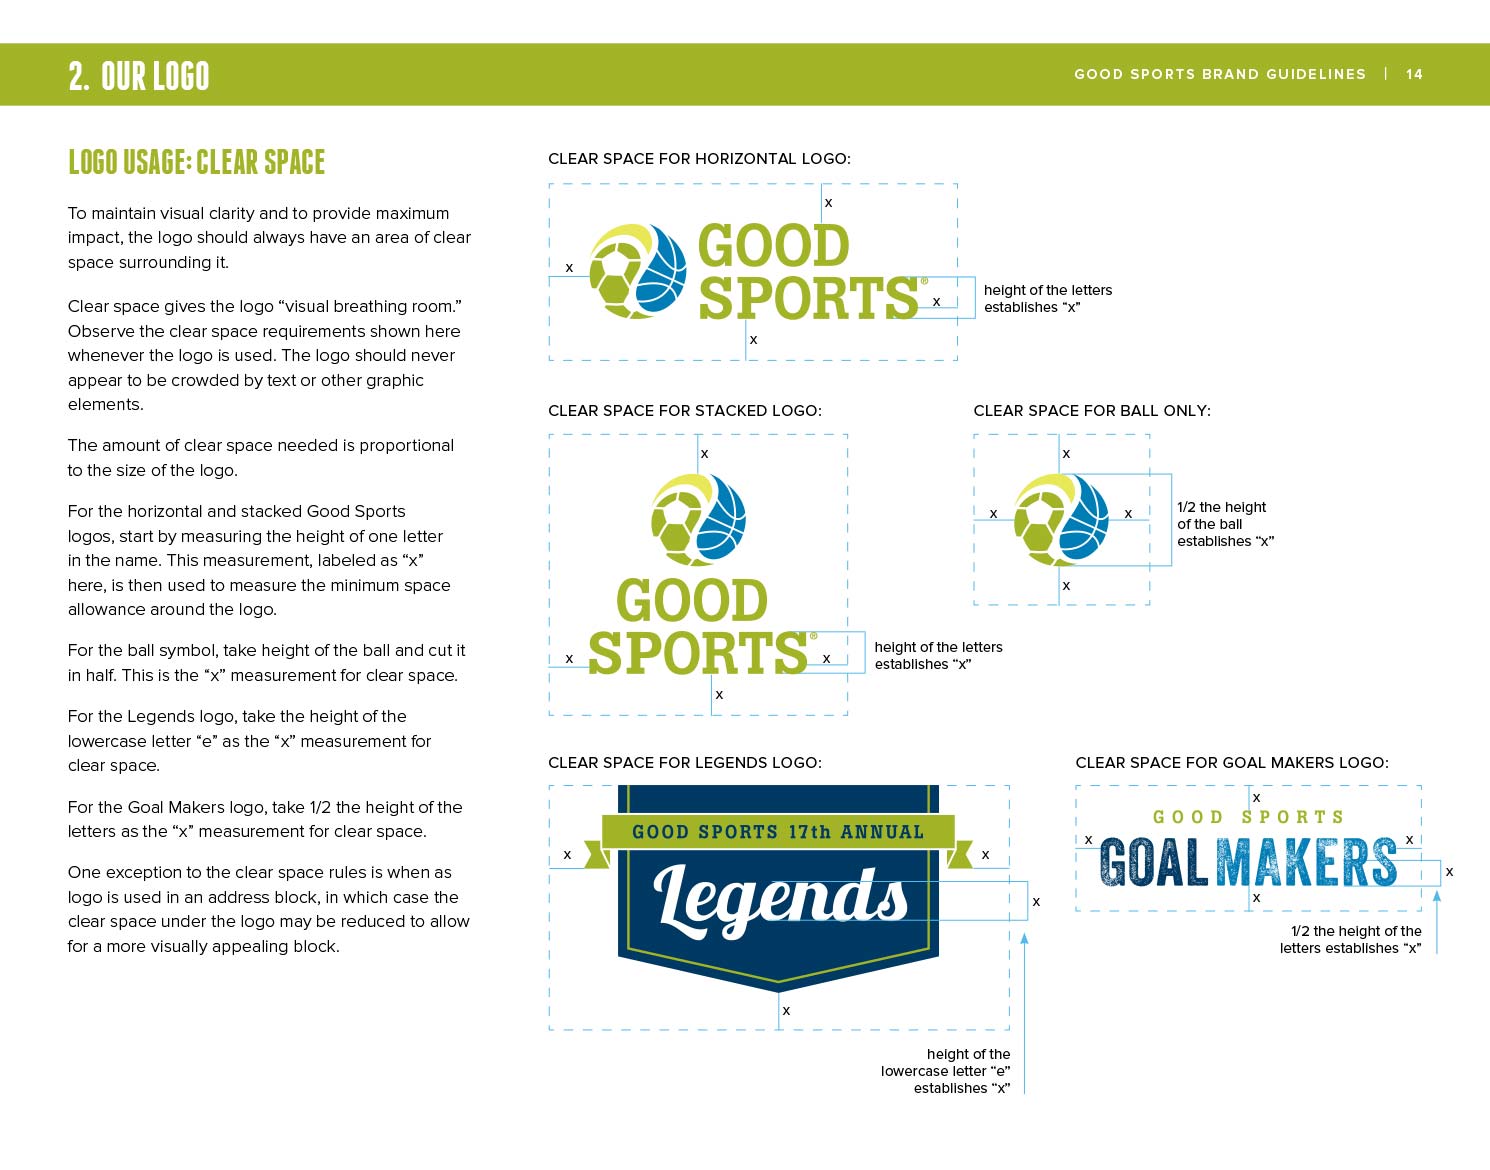 Good Sports Brand Guide showing logo clear space